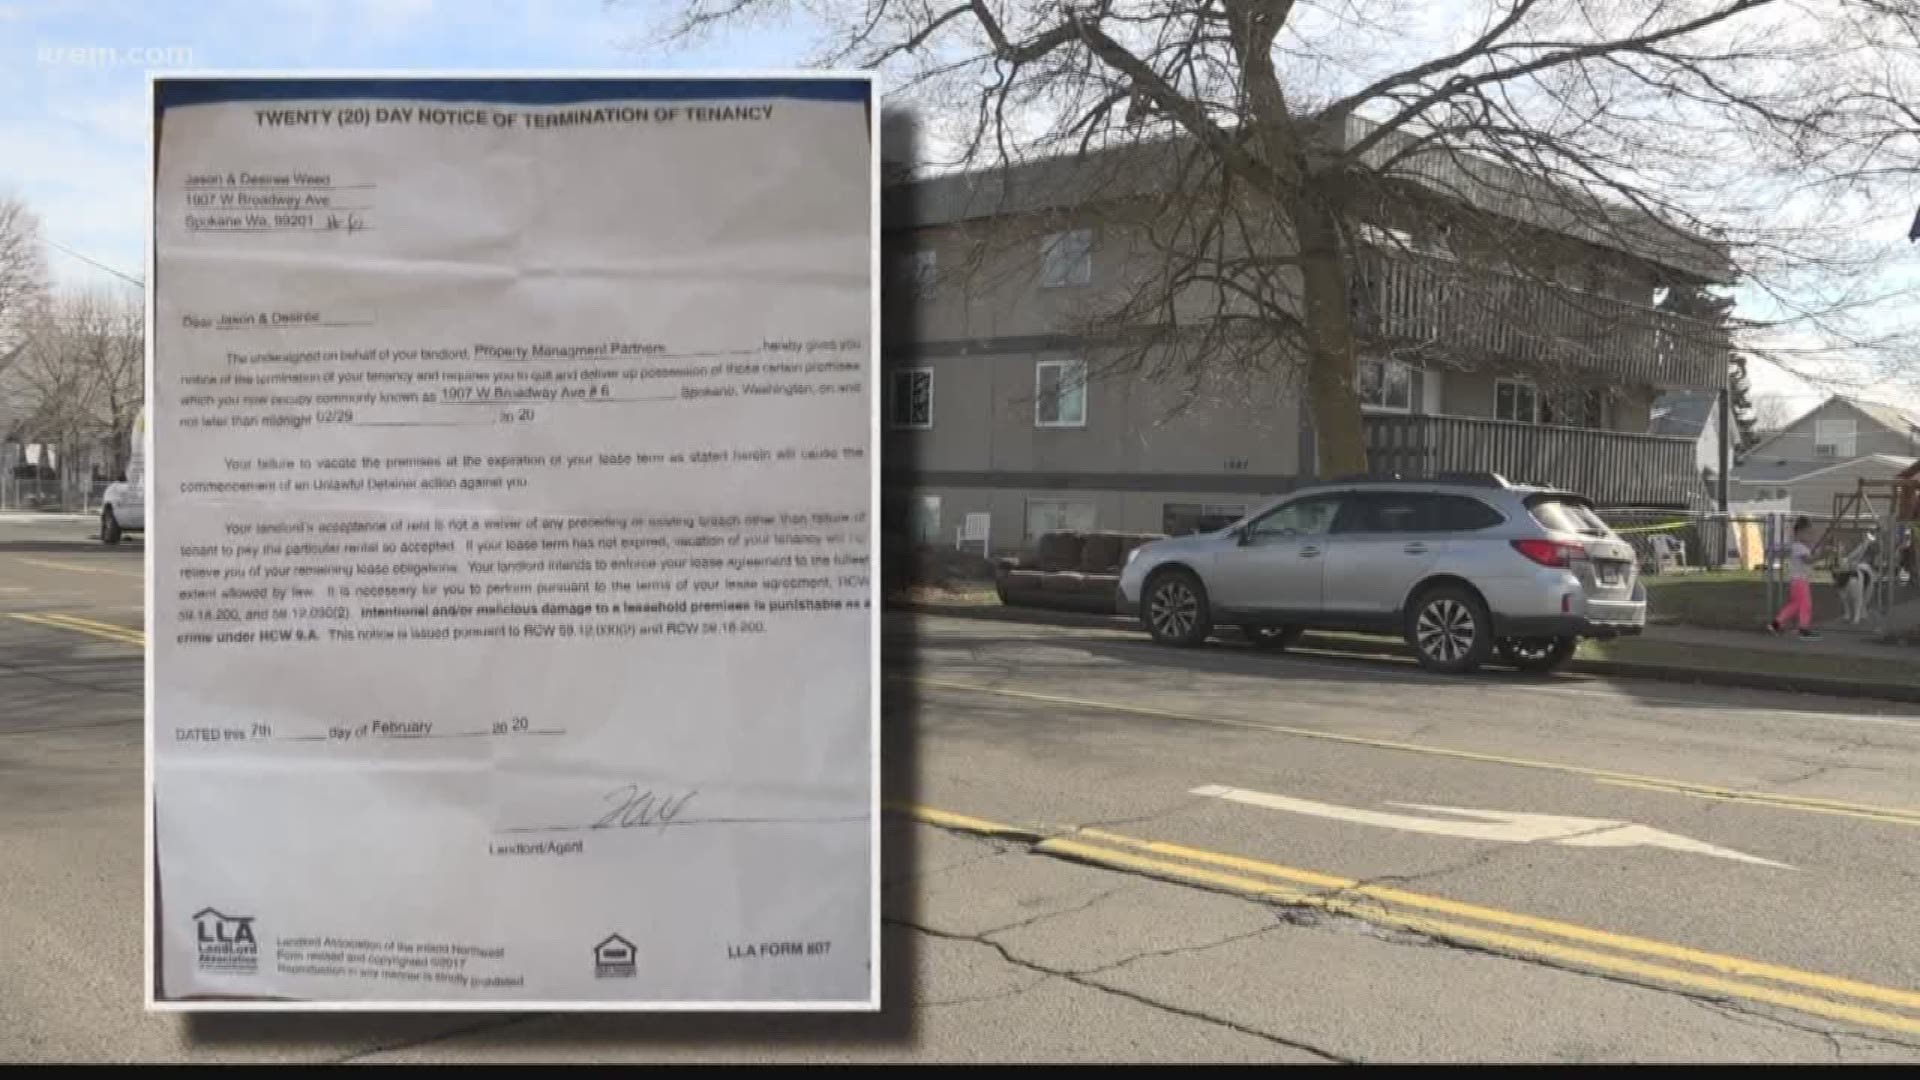 People living in a West Spokane apartment building got a 20 day notice to vacate. Saturday is the deadline, and many of the tenants have nowhere to go.